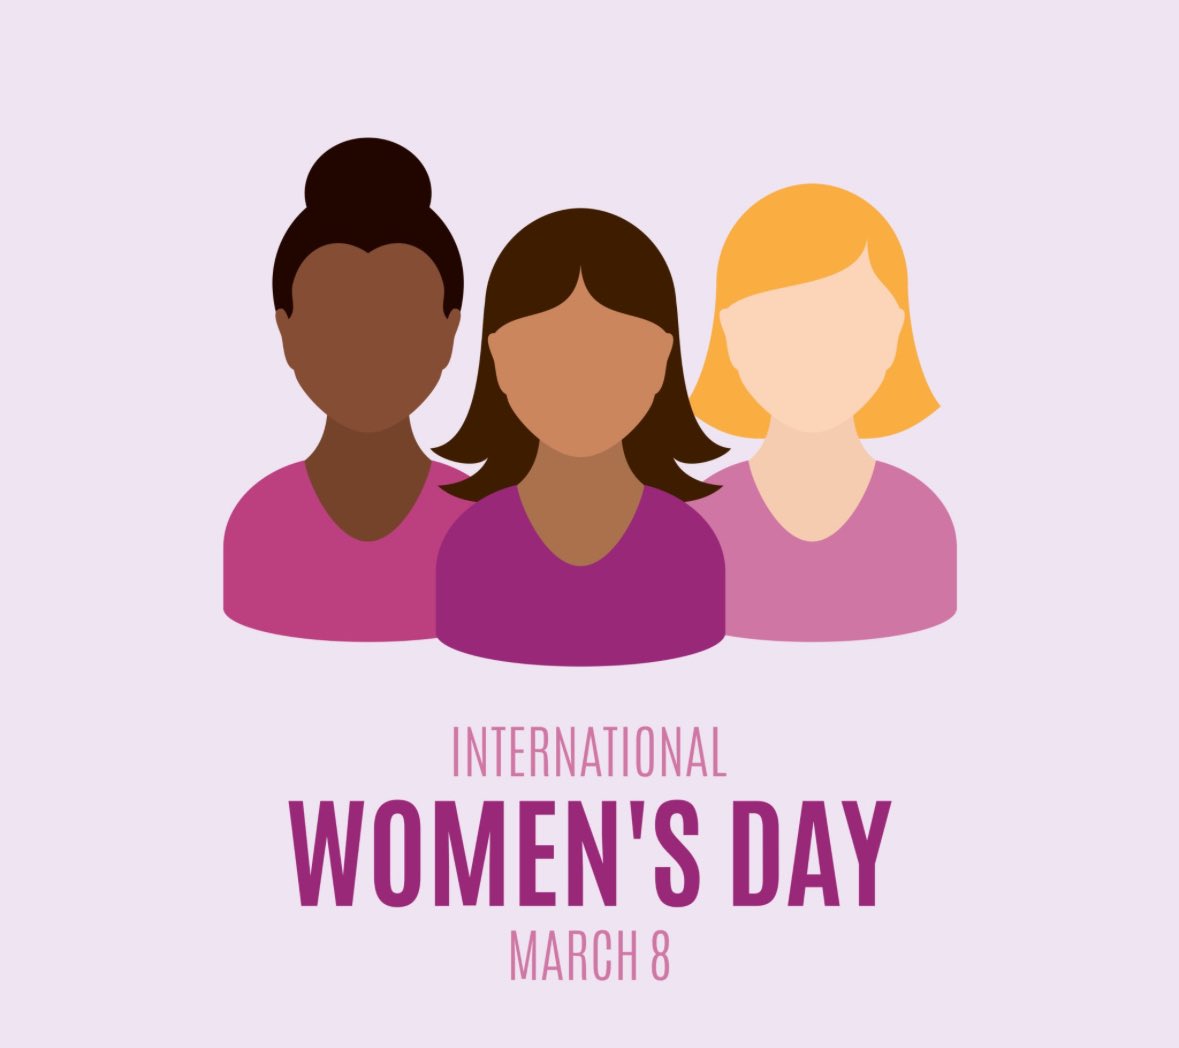 Happy #InternationalWomensDay ! While everyday I strive to be a better #Ally, the truth is that all my women mentors, colleagues, friends, mentees & family members do so much MORE for me everyday! So I am thankful for you all today & everyday ! #WomenInMedicine #HeForShe